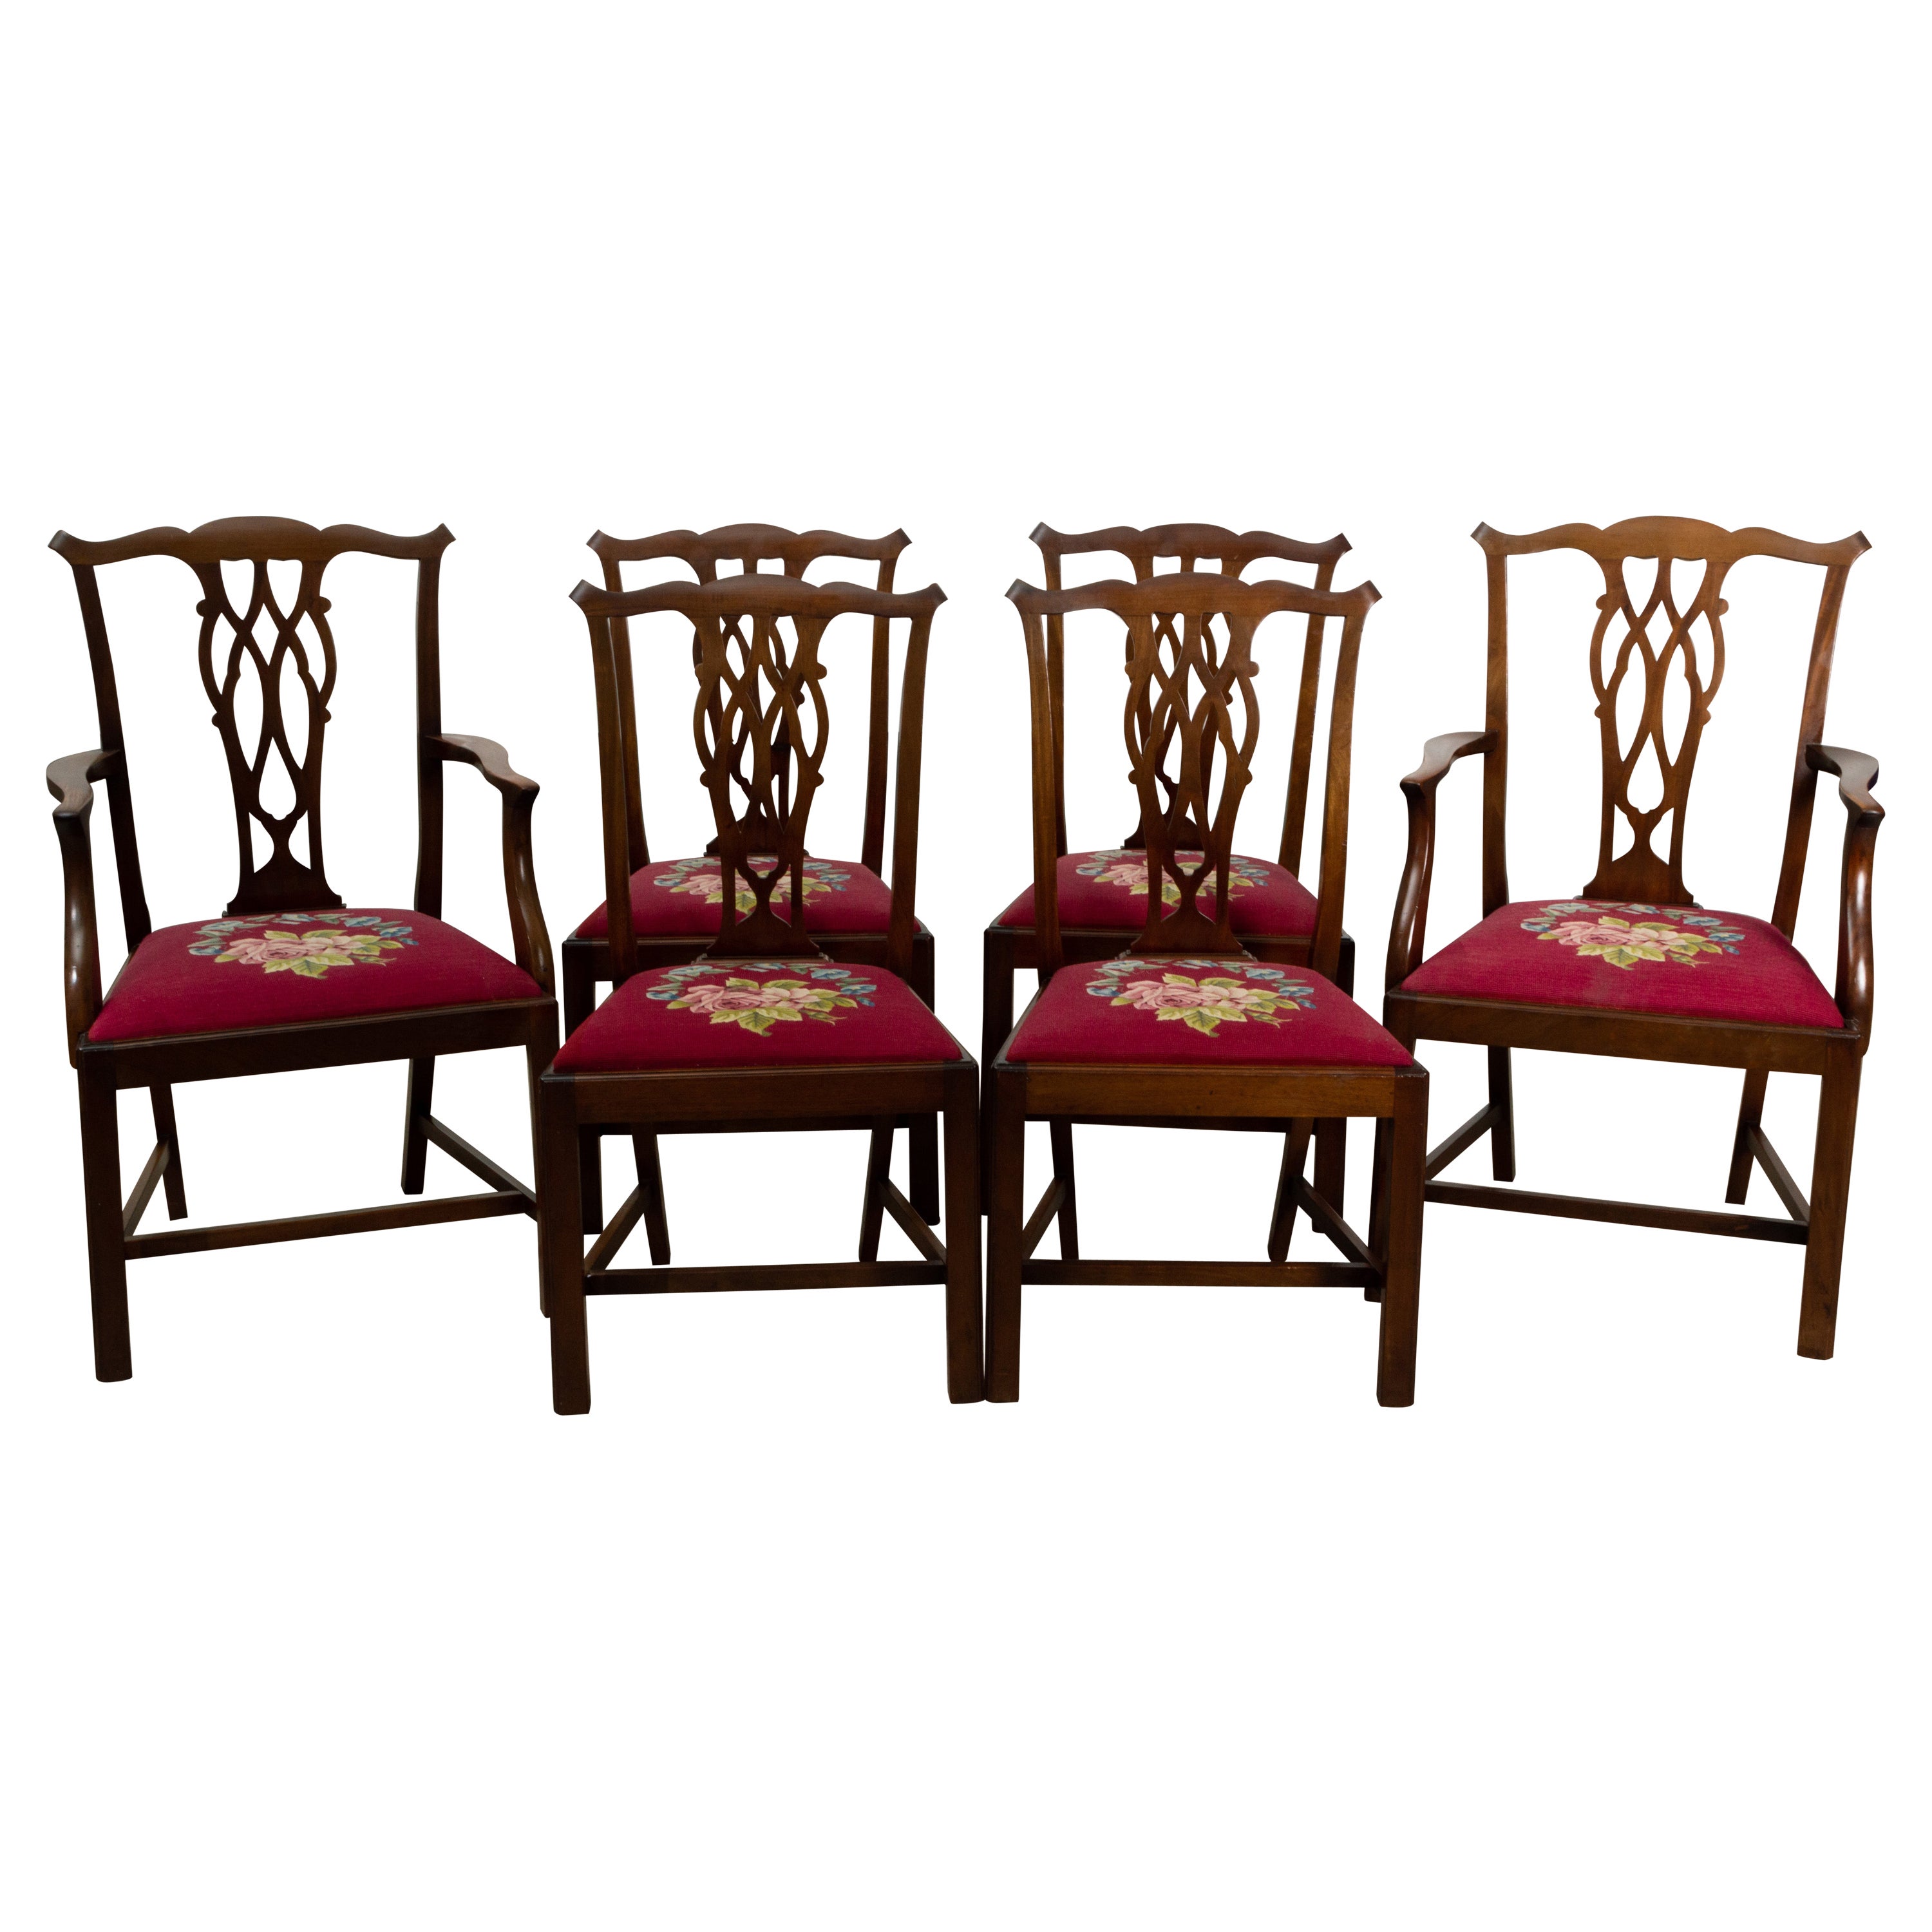 6 Antique English Victorian Chippendale Revival Mahogany Dining Chairs For Sale